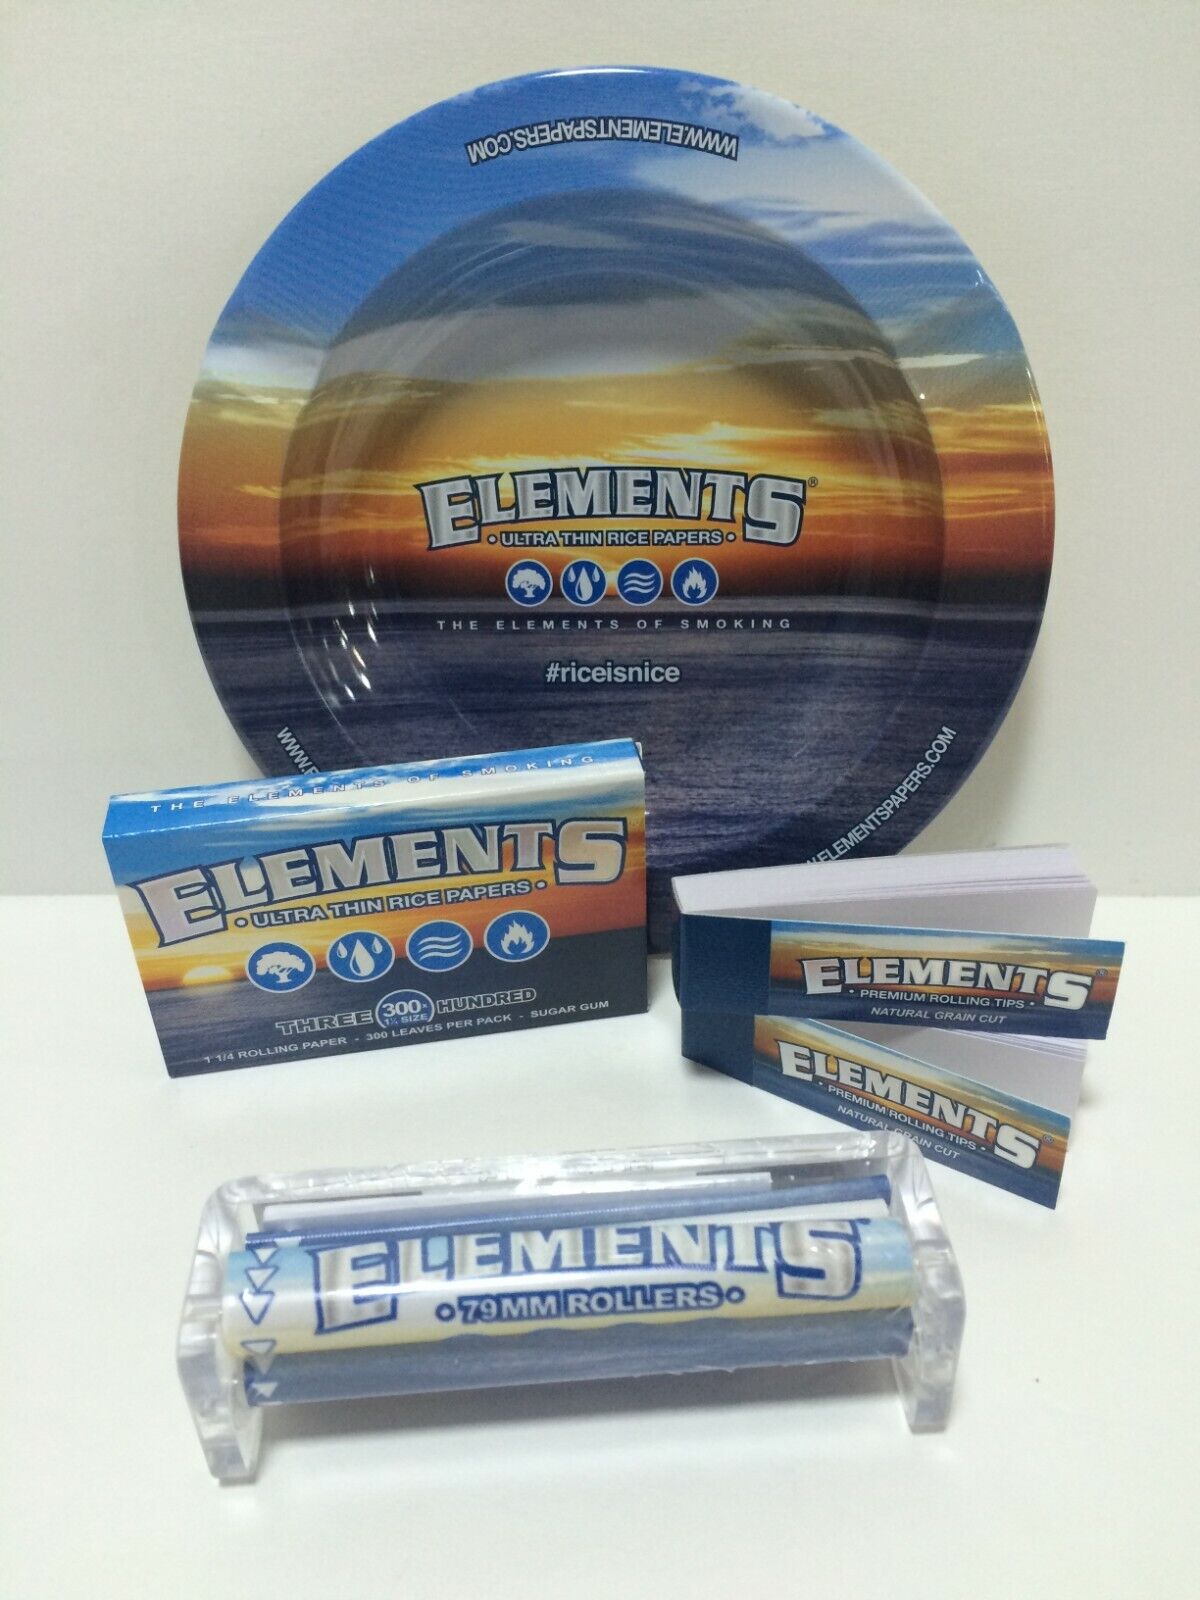 ELEMENTS Bundle - Pack of 300 1 1/4 Size Papers, 79mm Roller, 2 Tips & ASHTRAY 